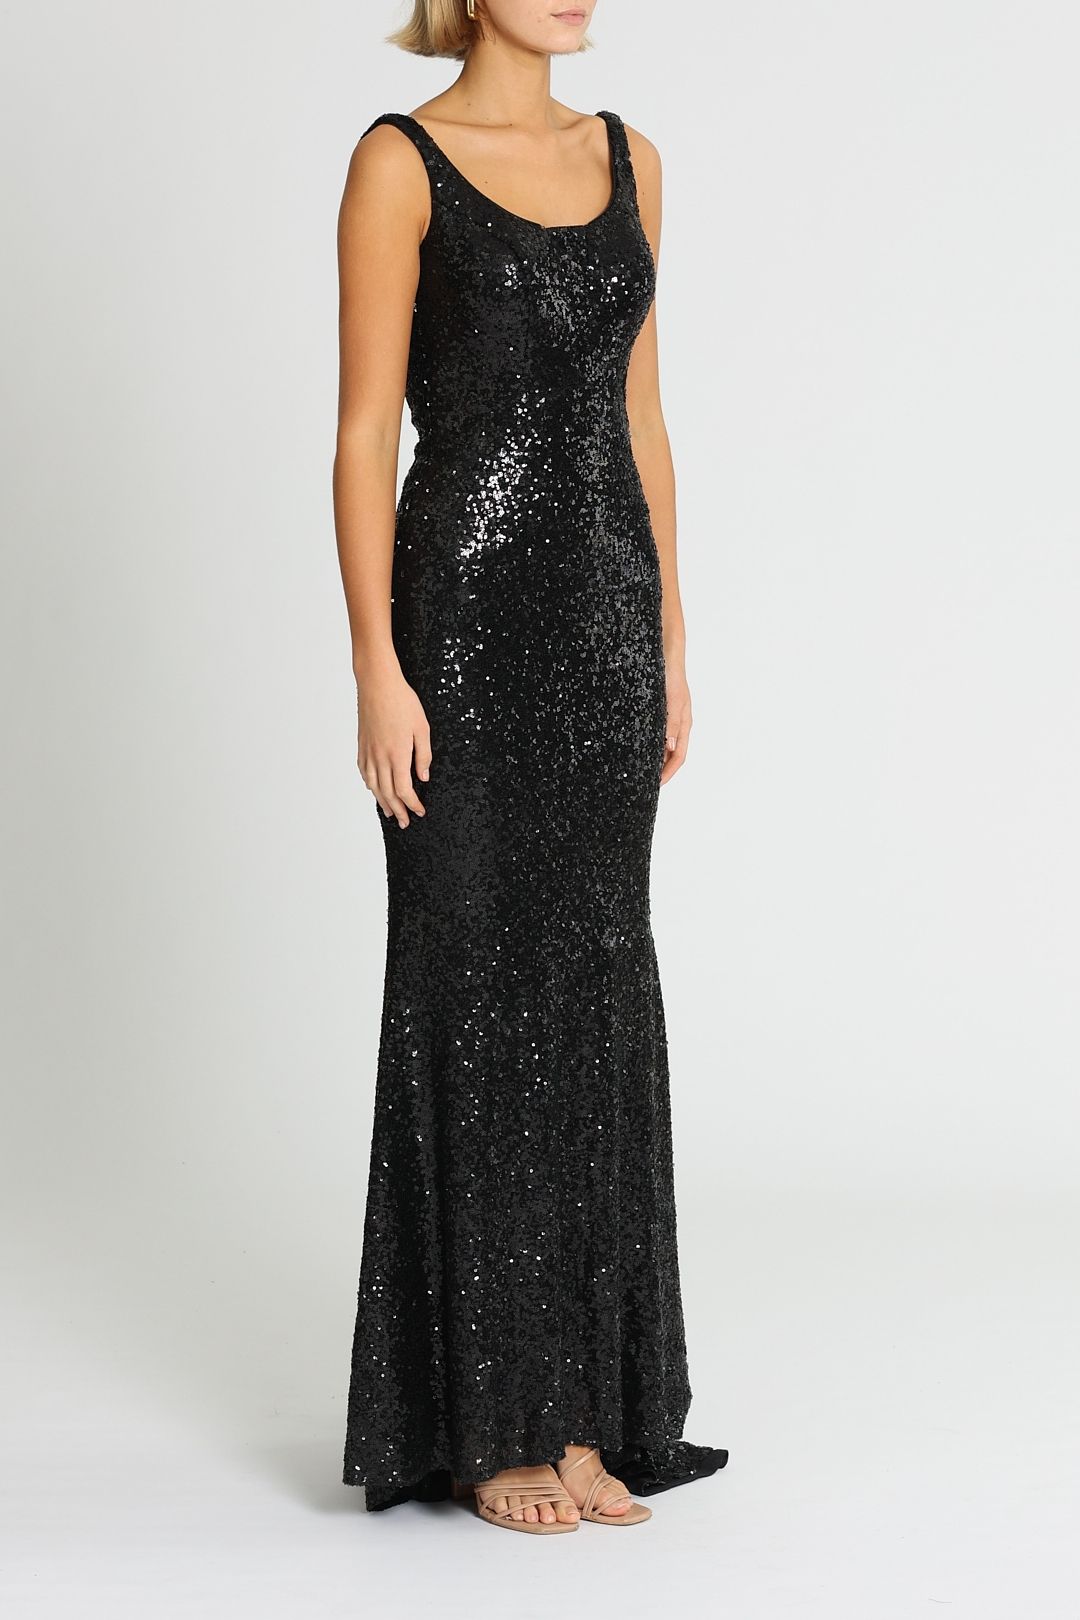 Tinaholy Annalise Sequin Gown Black Sleeveless